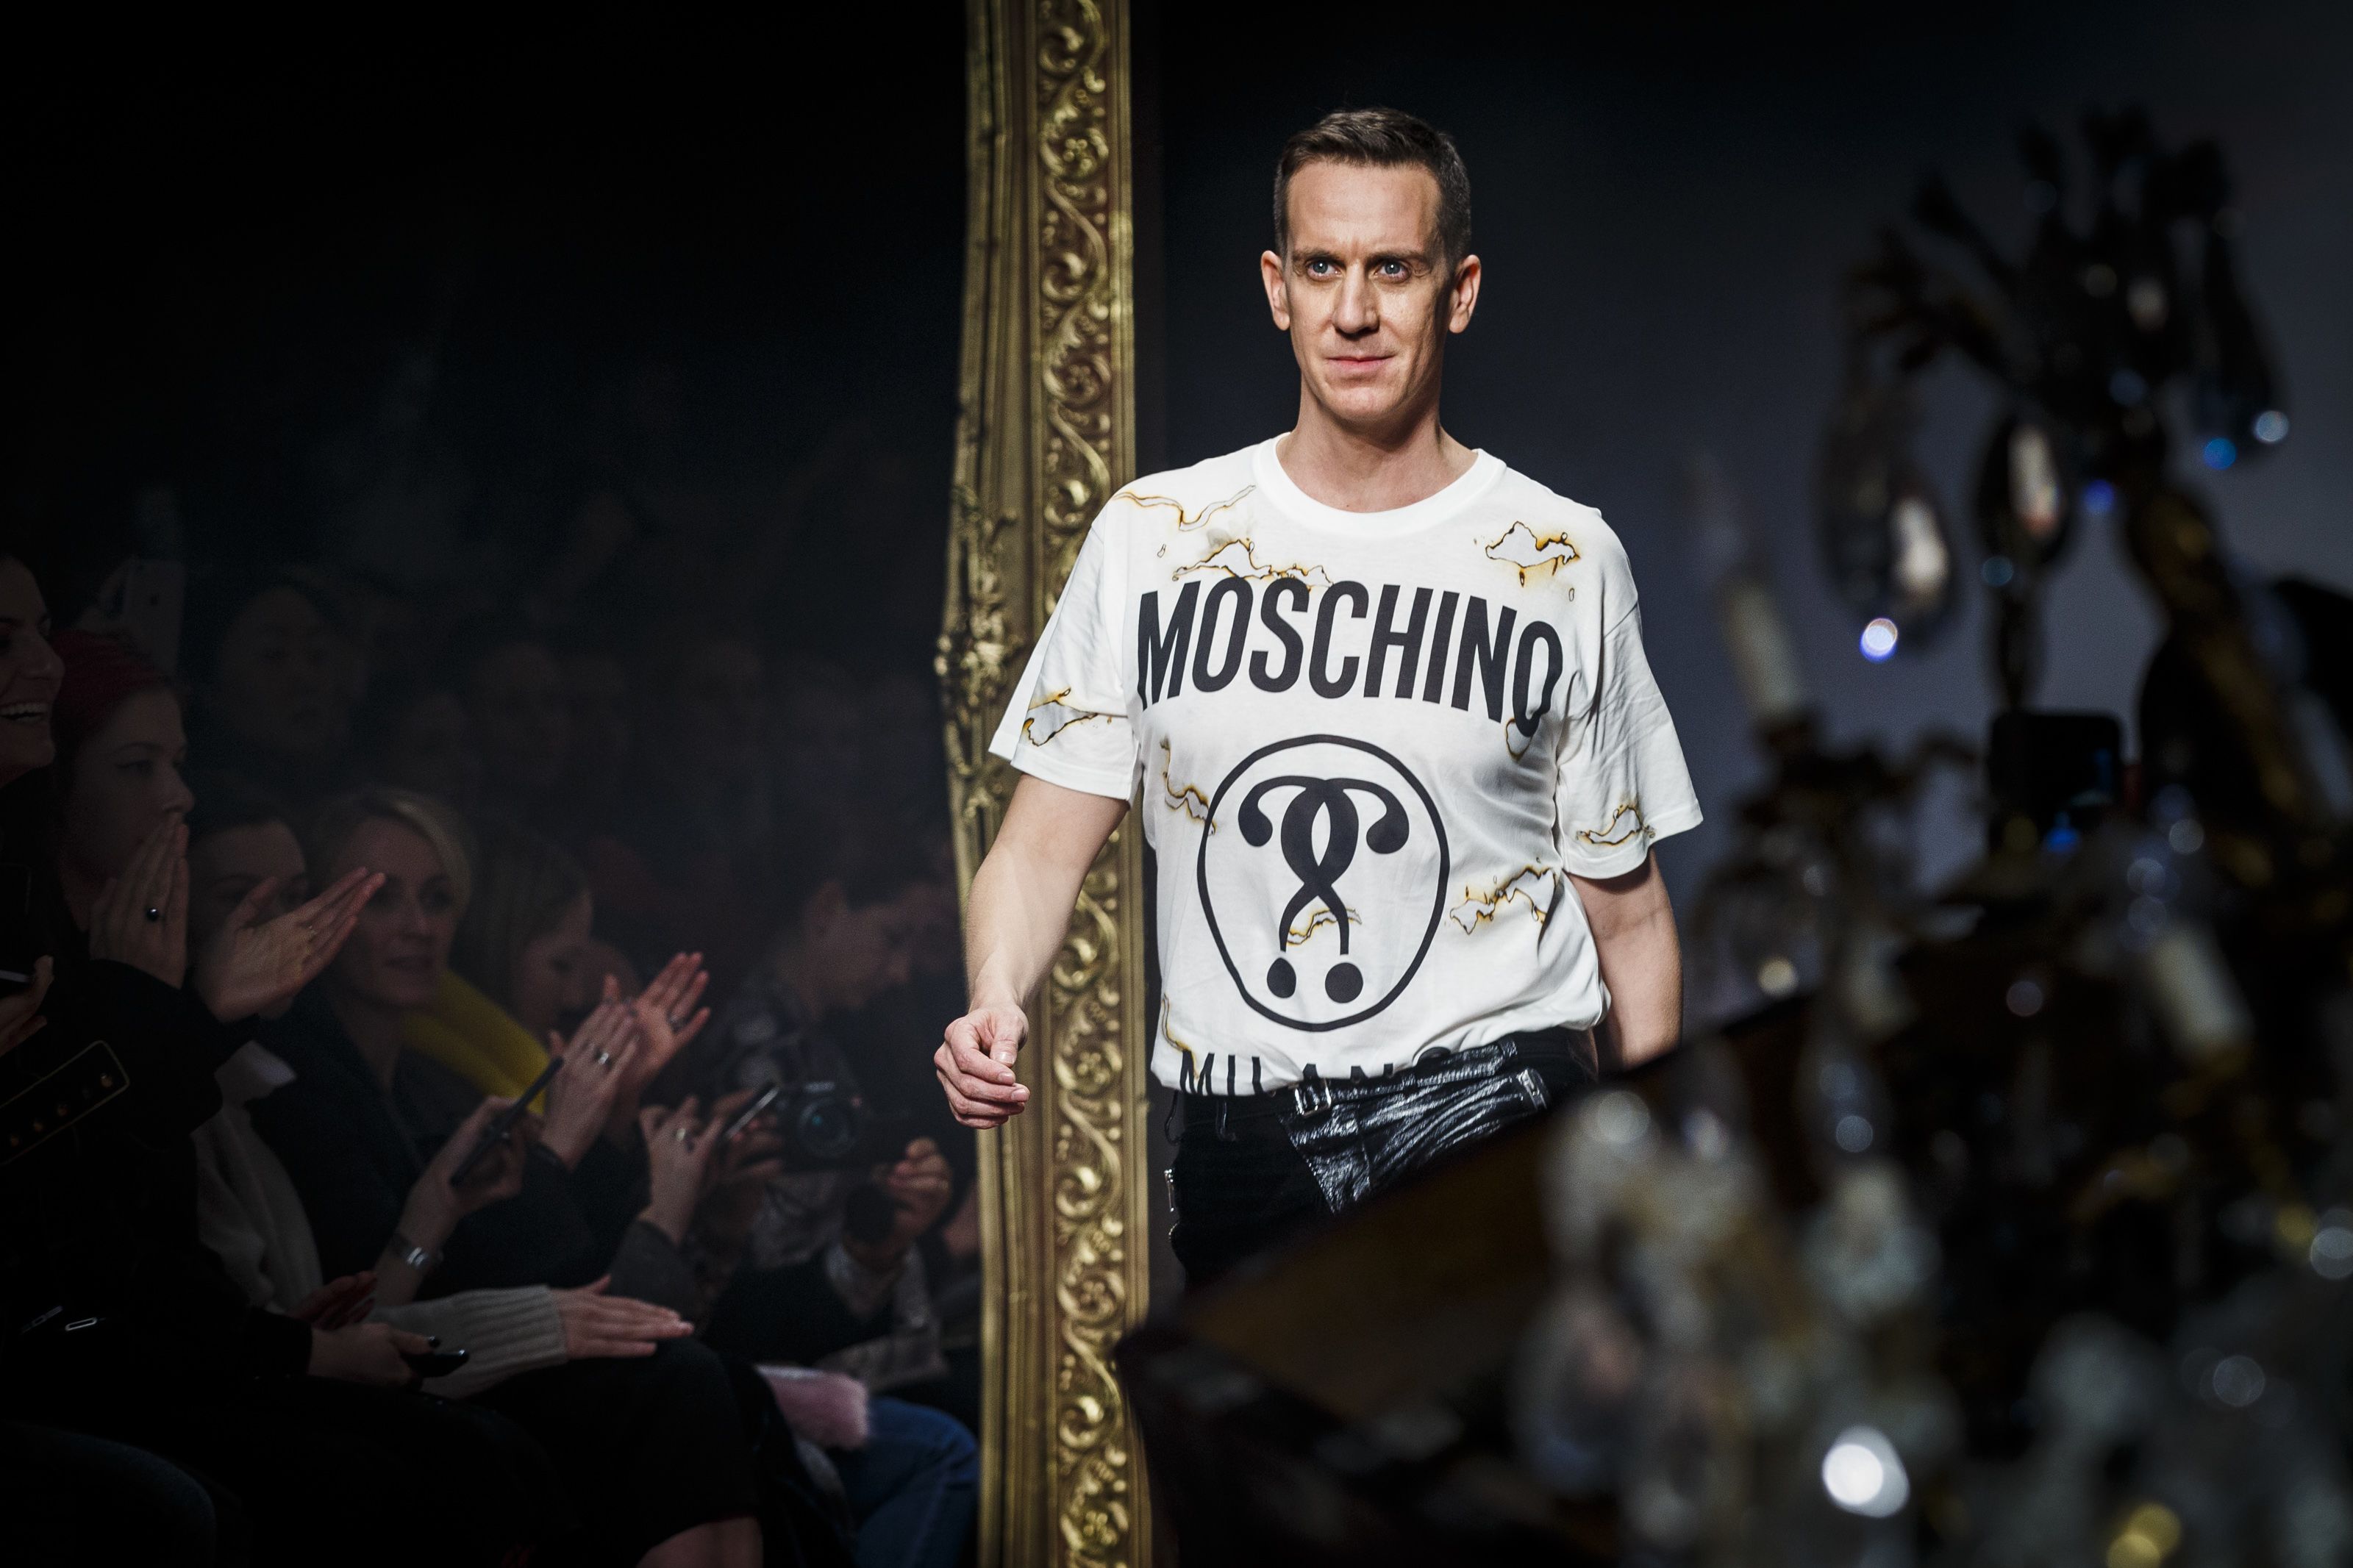 The HM And Moschino Collab Is Already Selling Out